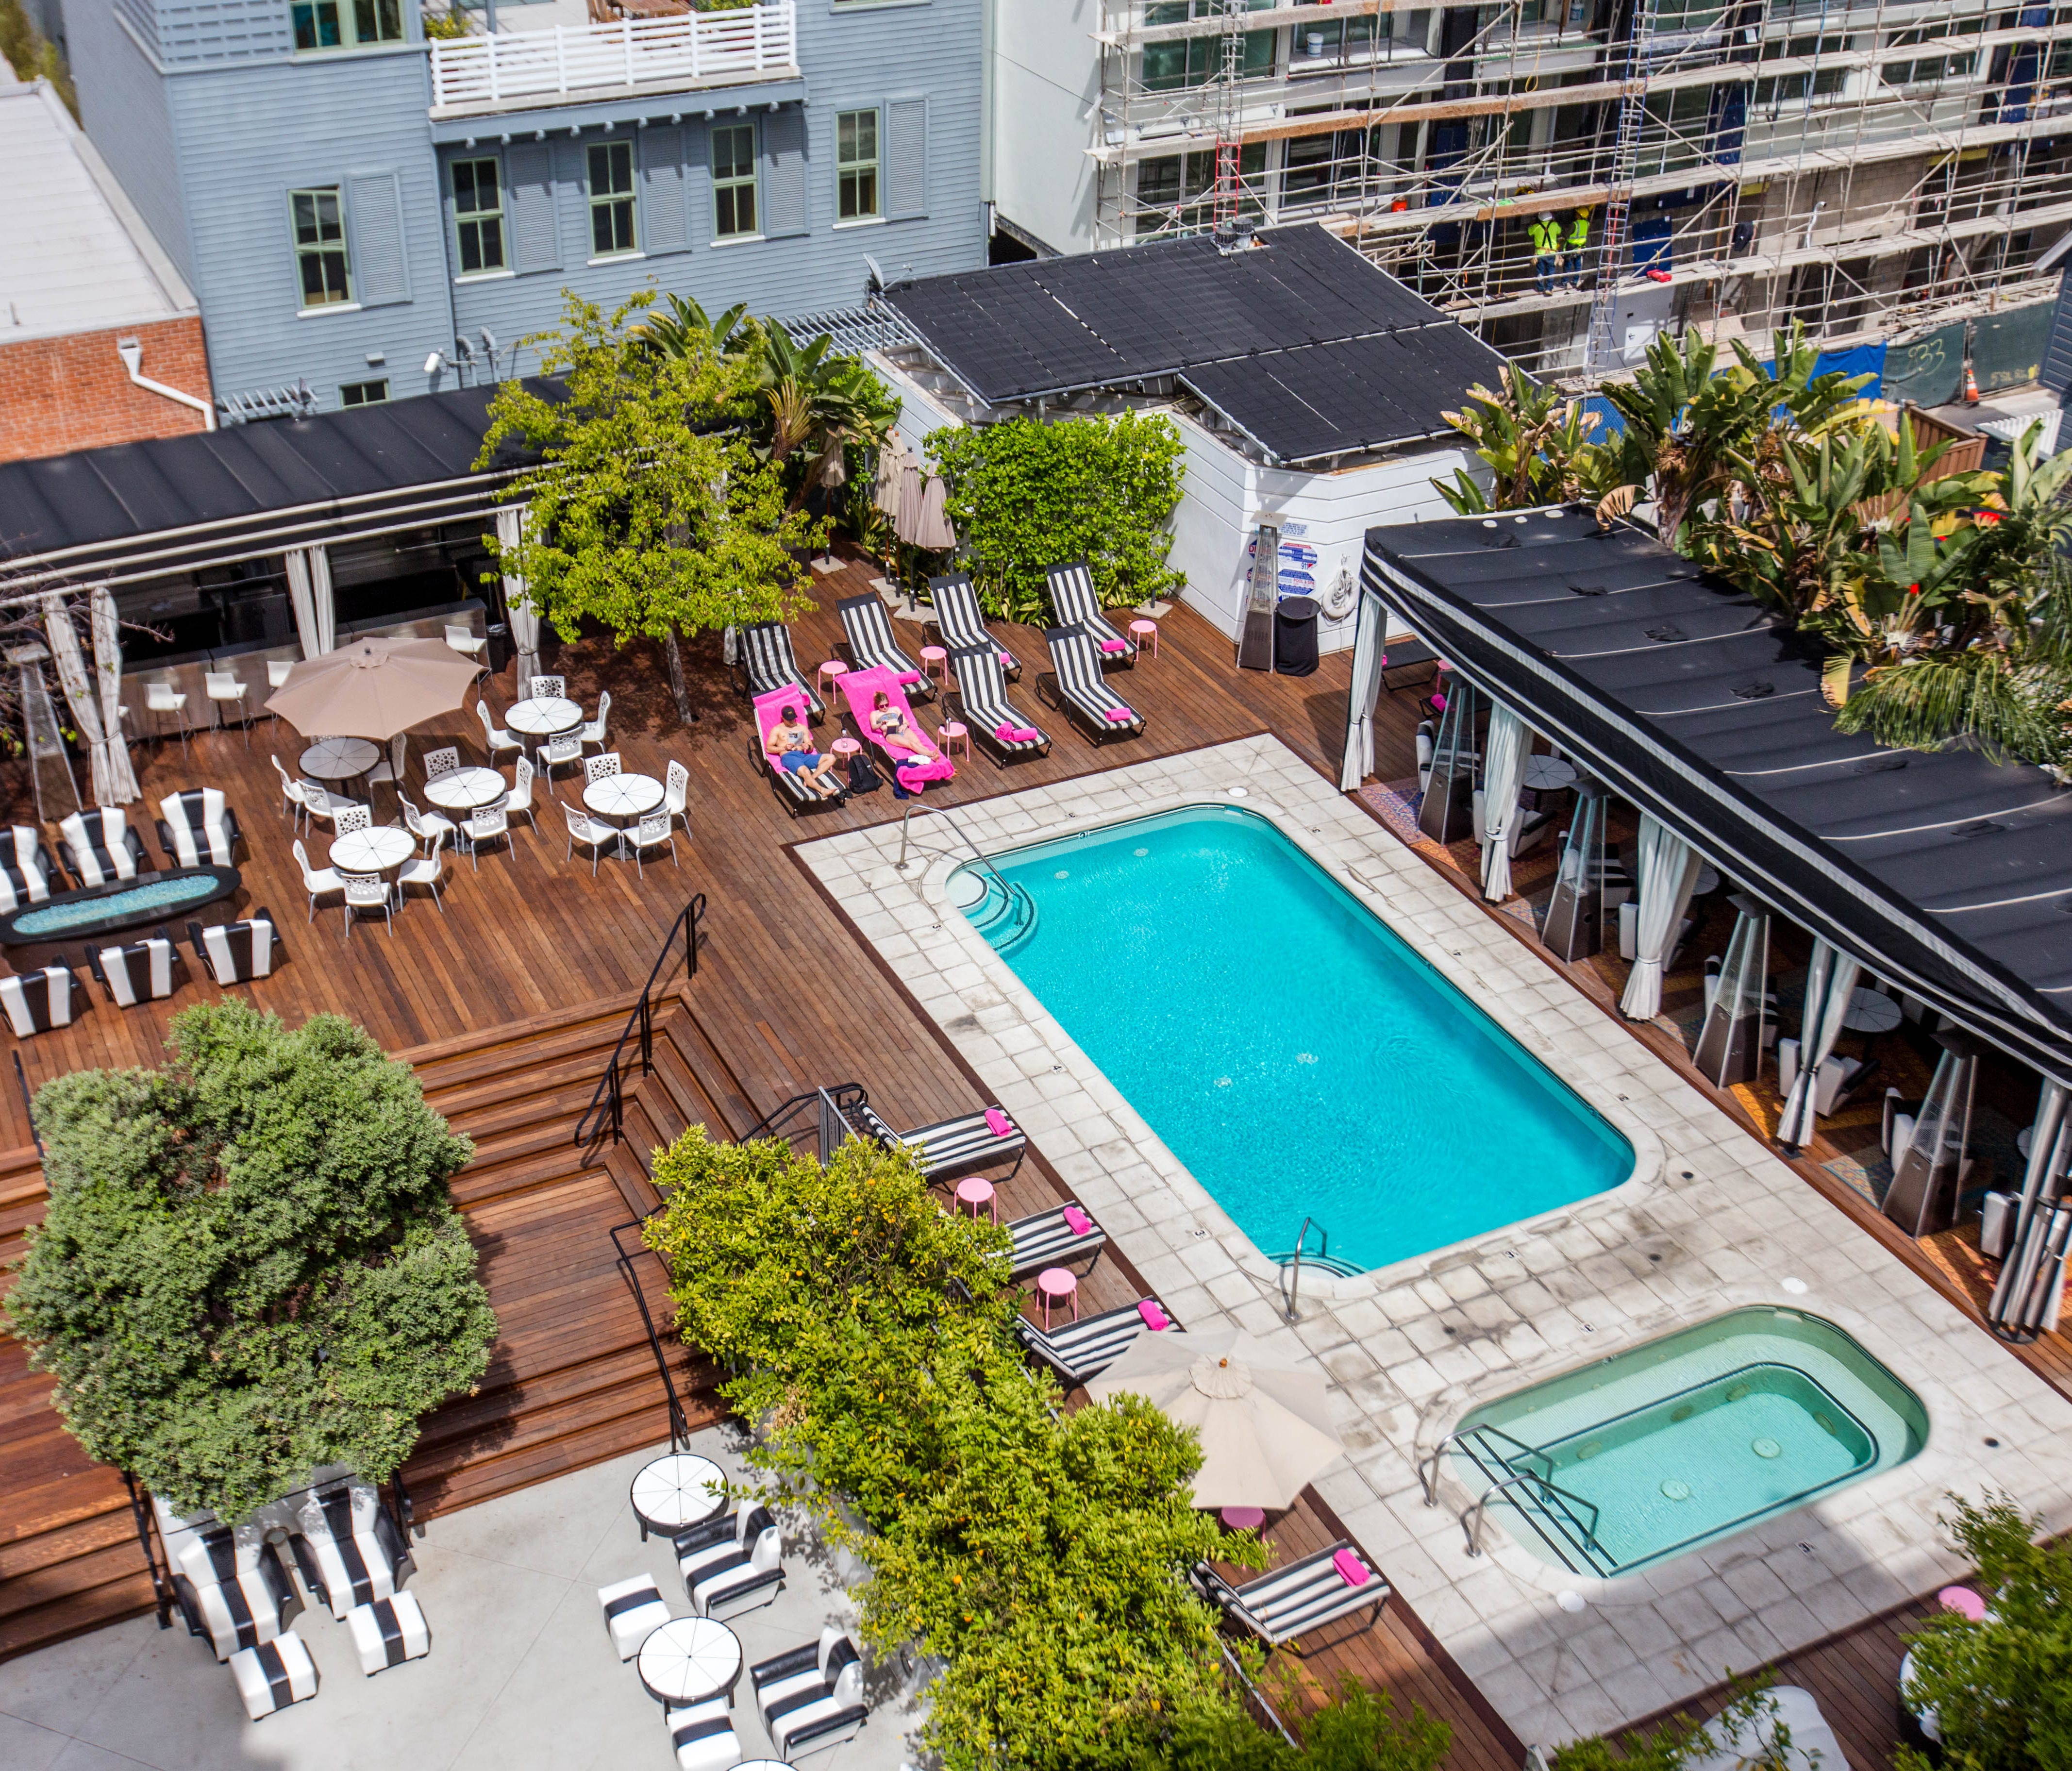 Hotel Shangri-La Santa Monica: Business travelers, families and leisure vacationers looking to party and sunbathe will all find something to suit their travel needs at this 70-room property. Originally built in 1939, this historic spot is situated fi